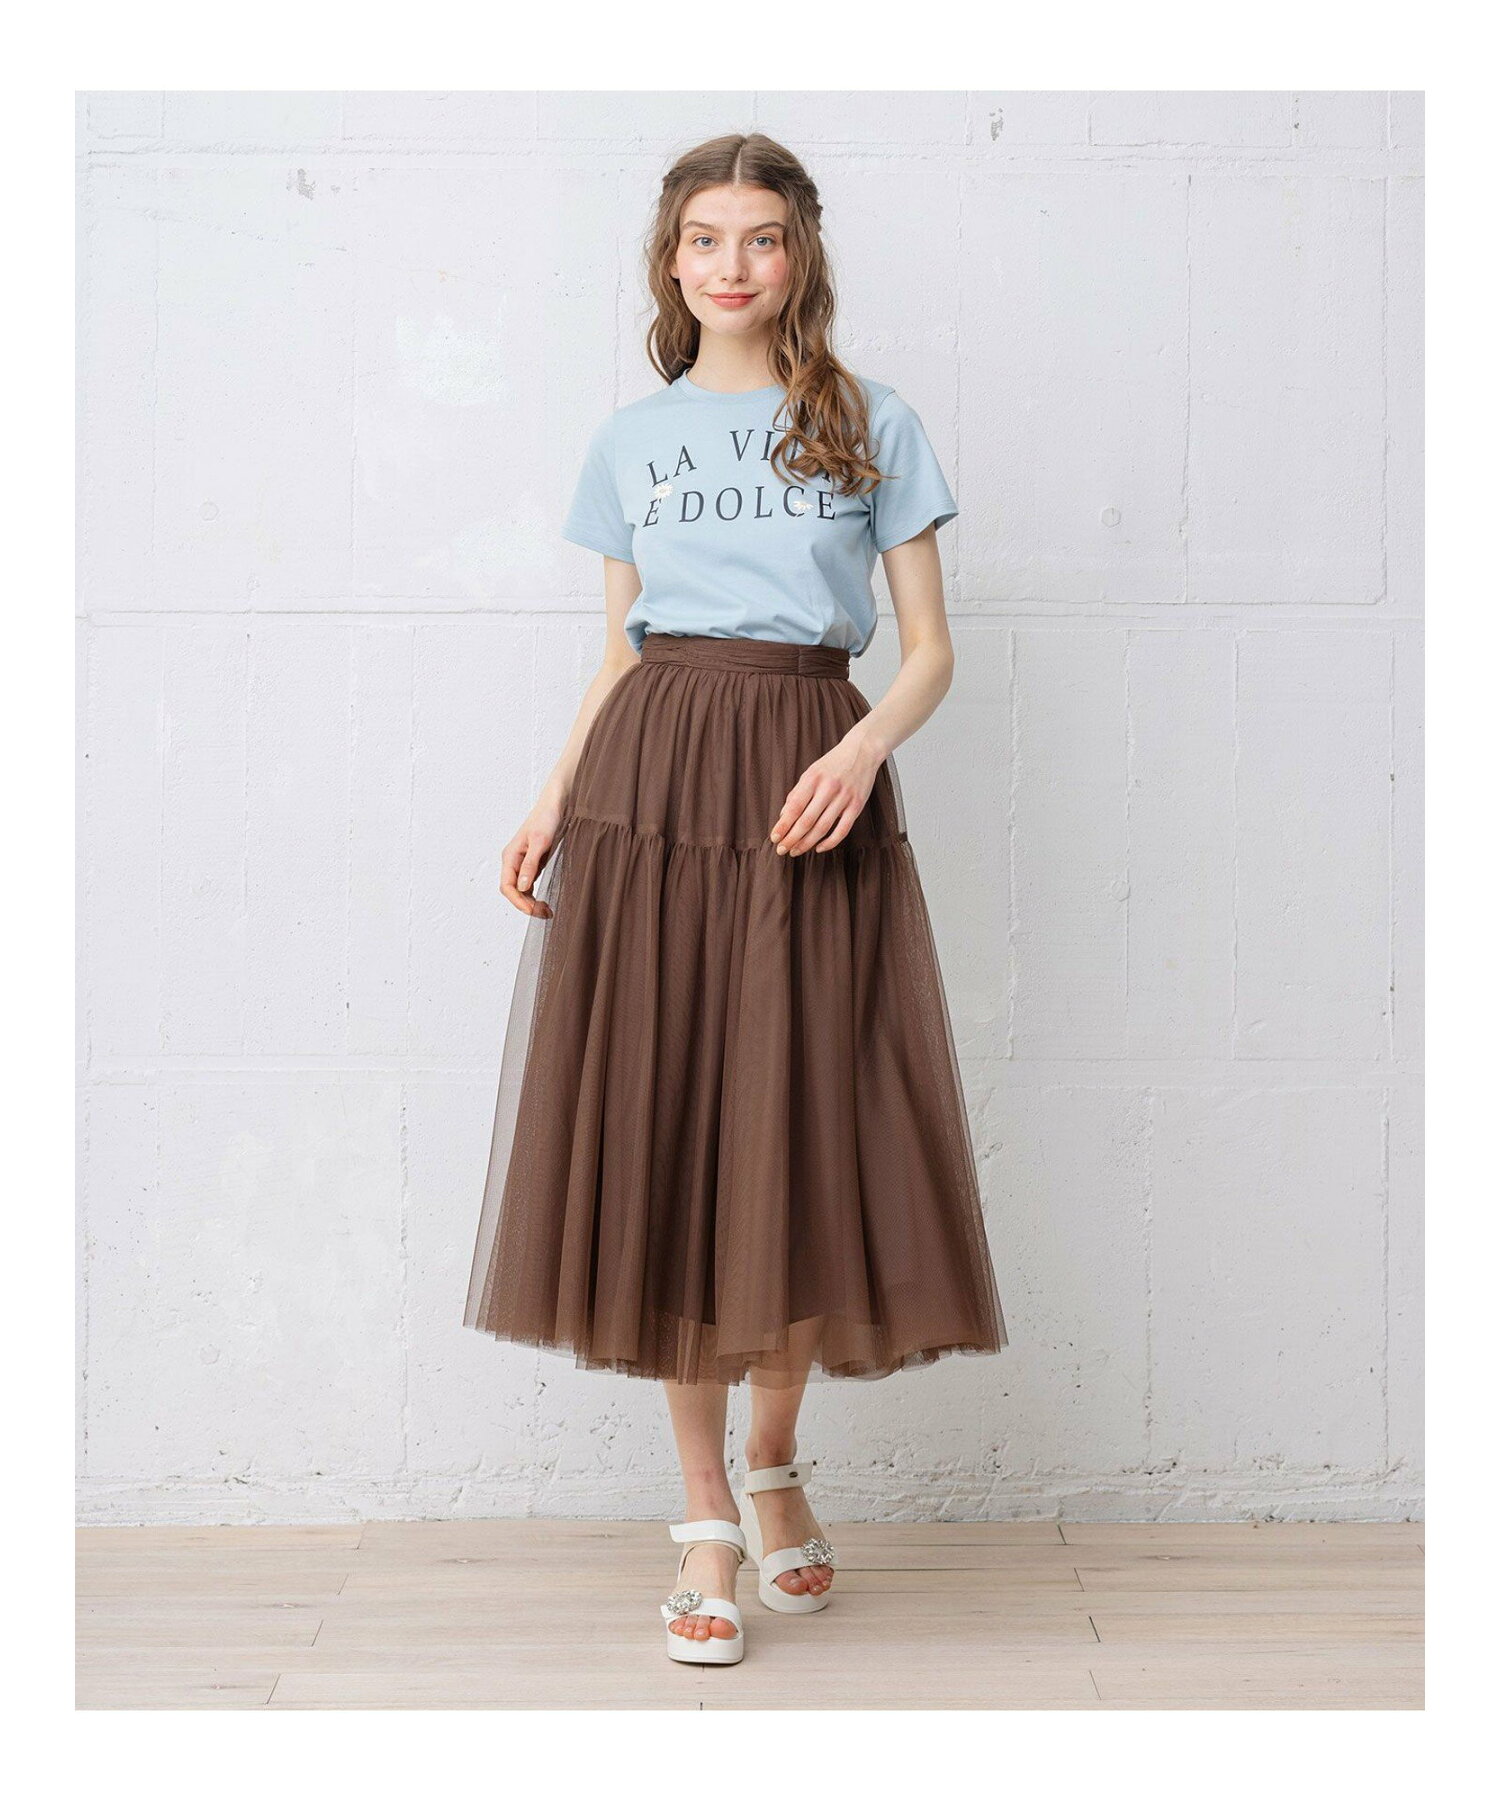 【WEB限定】【TOCCA lAVENDER】Fruit Color Tulle Skirt スカート